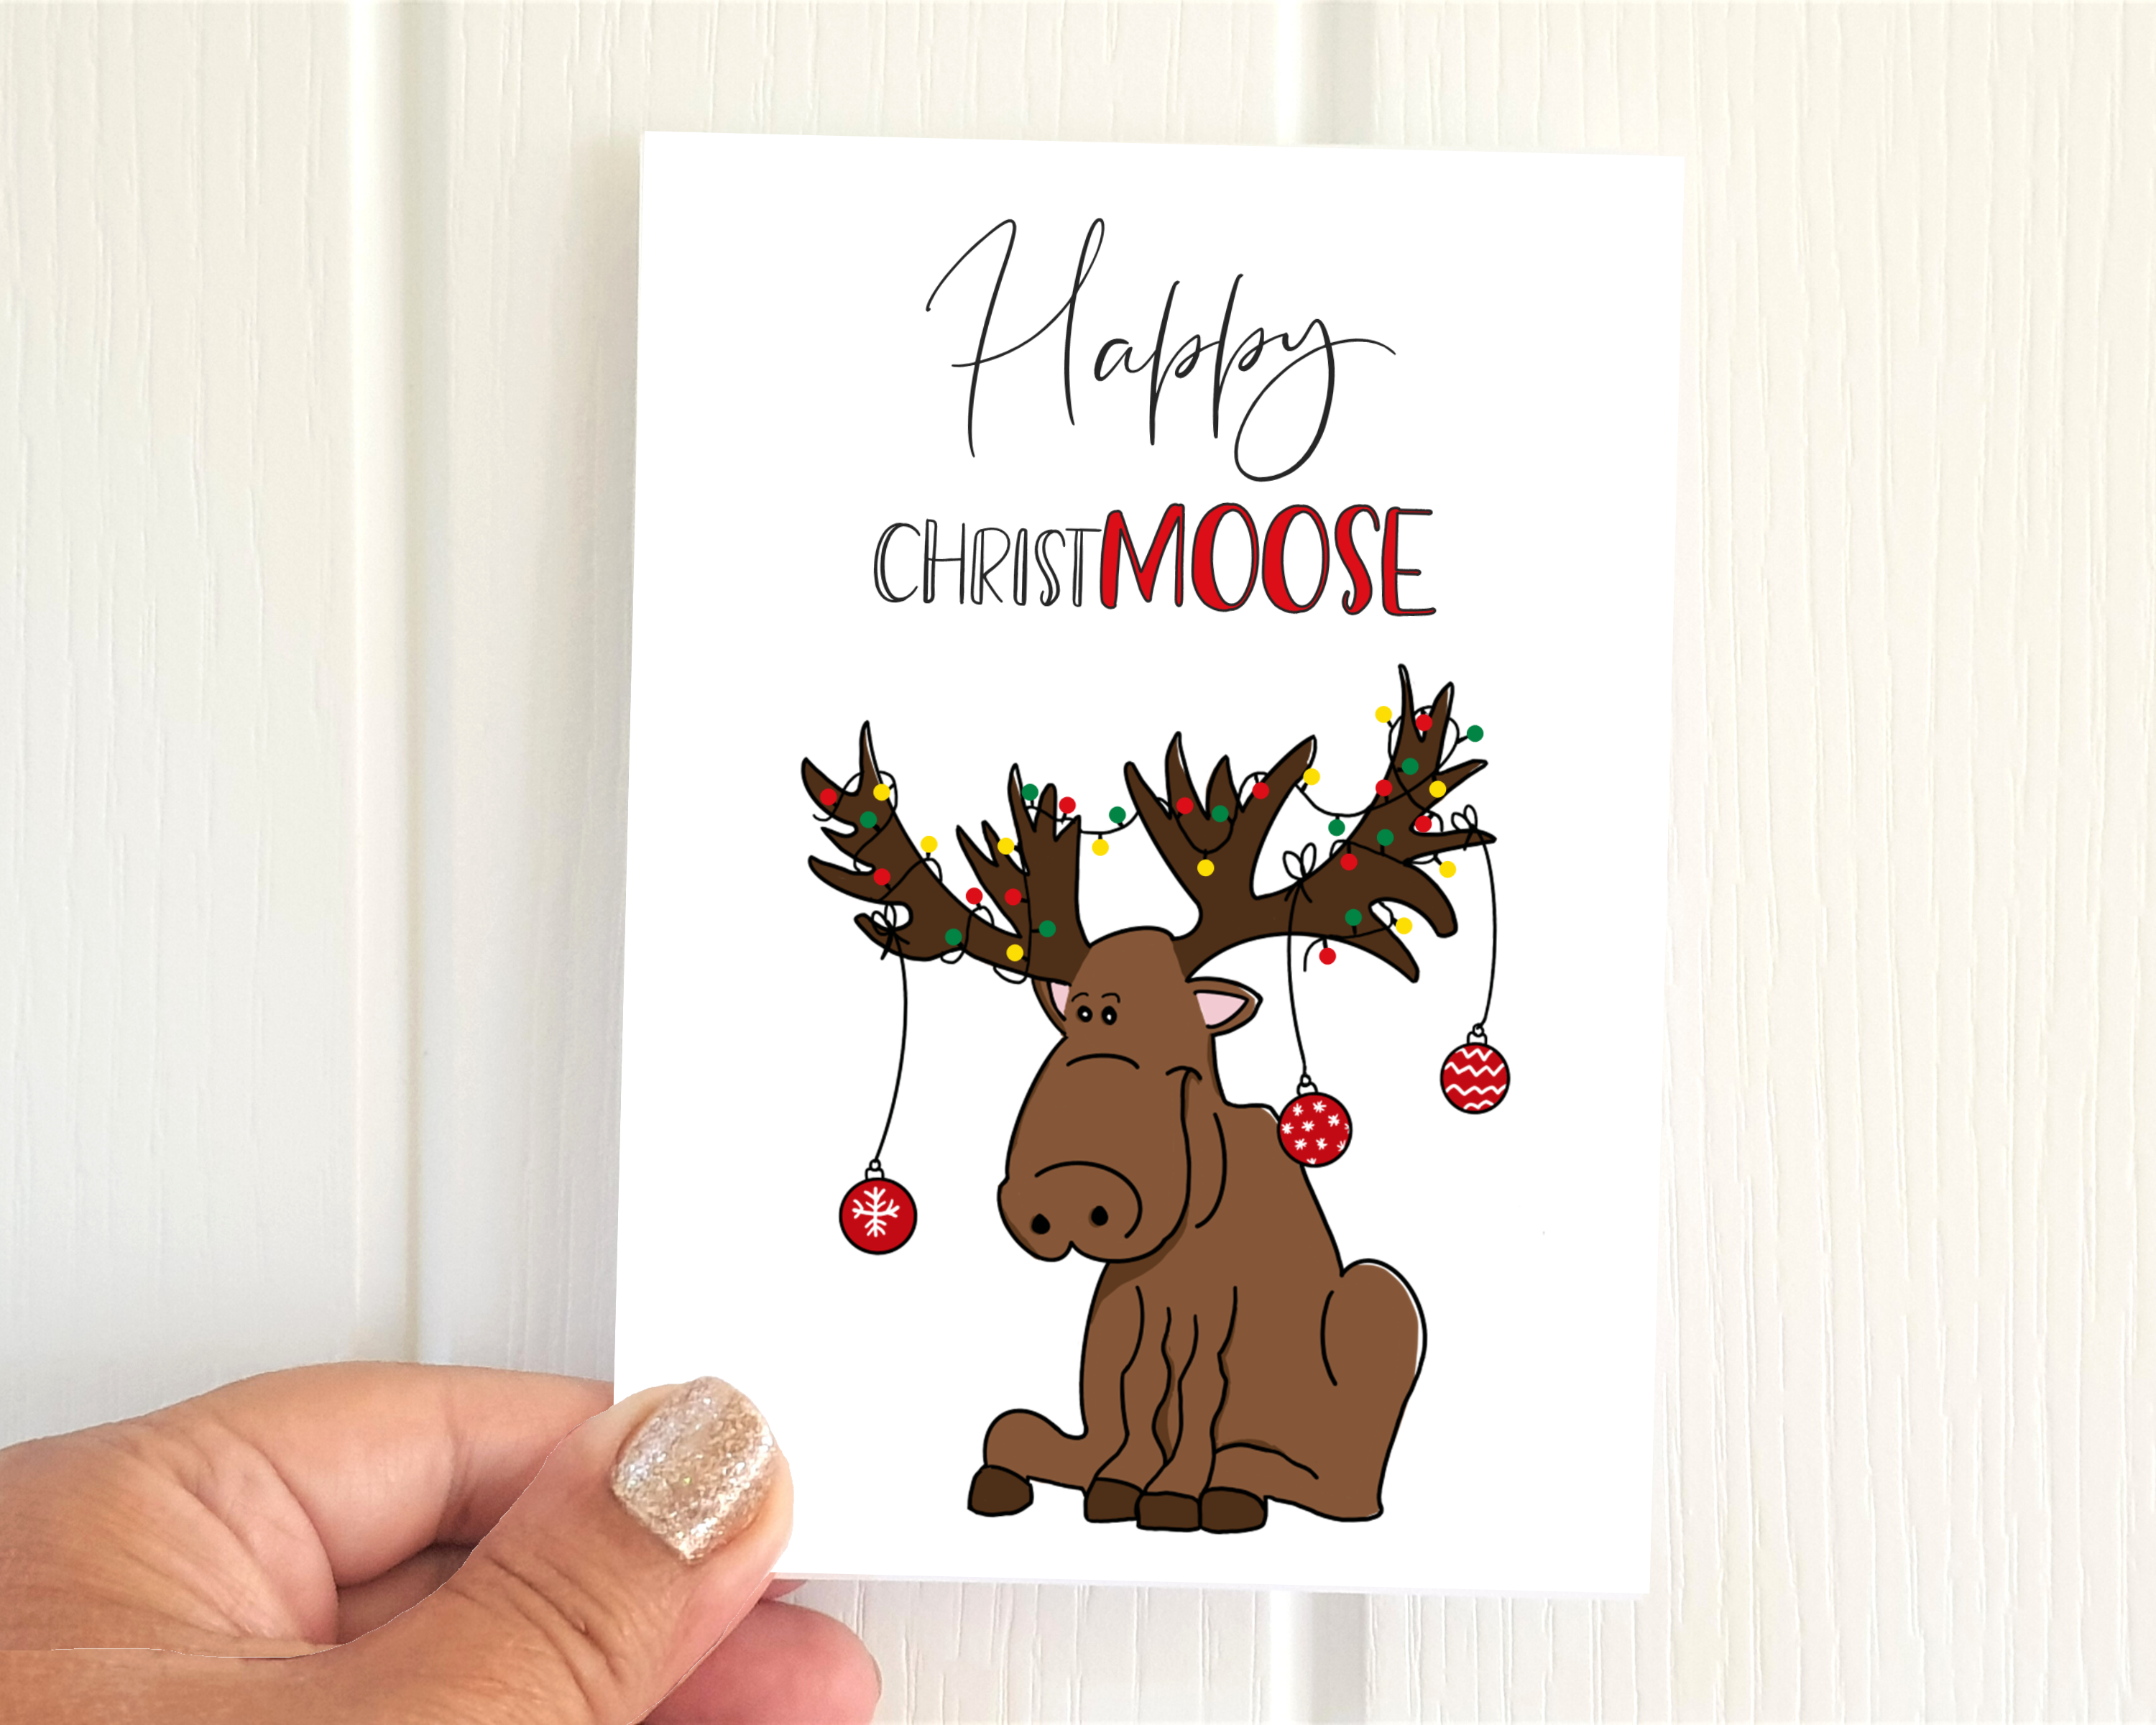 Poppleberry A6 'Happy Christ-moose' Glittered Christmas Cards on White Cardstock, size compared to thumb.